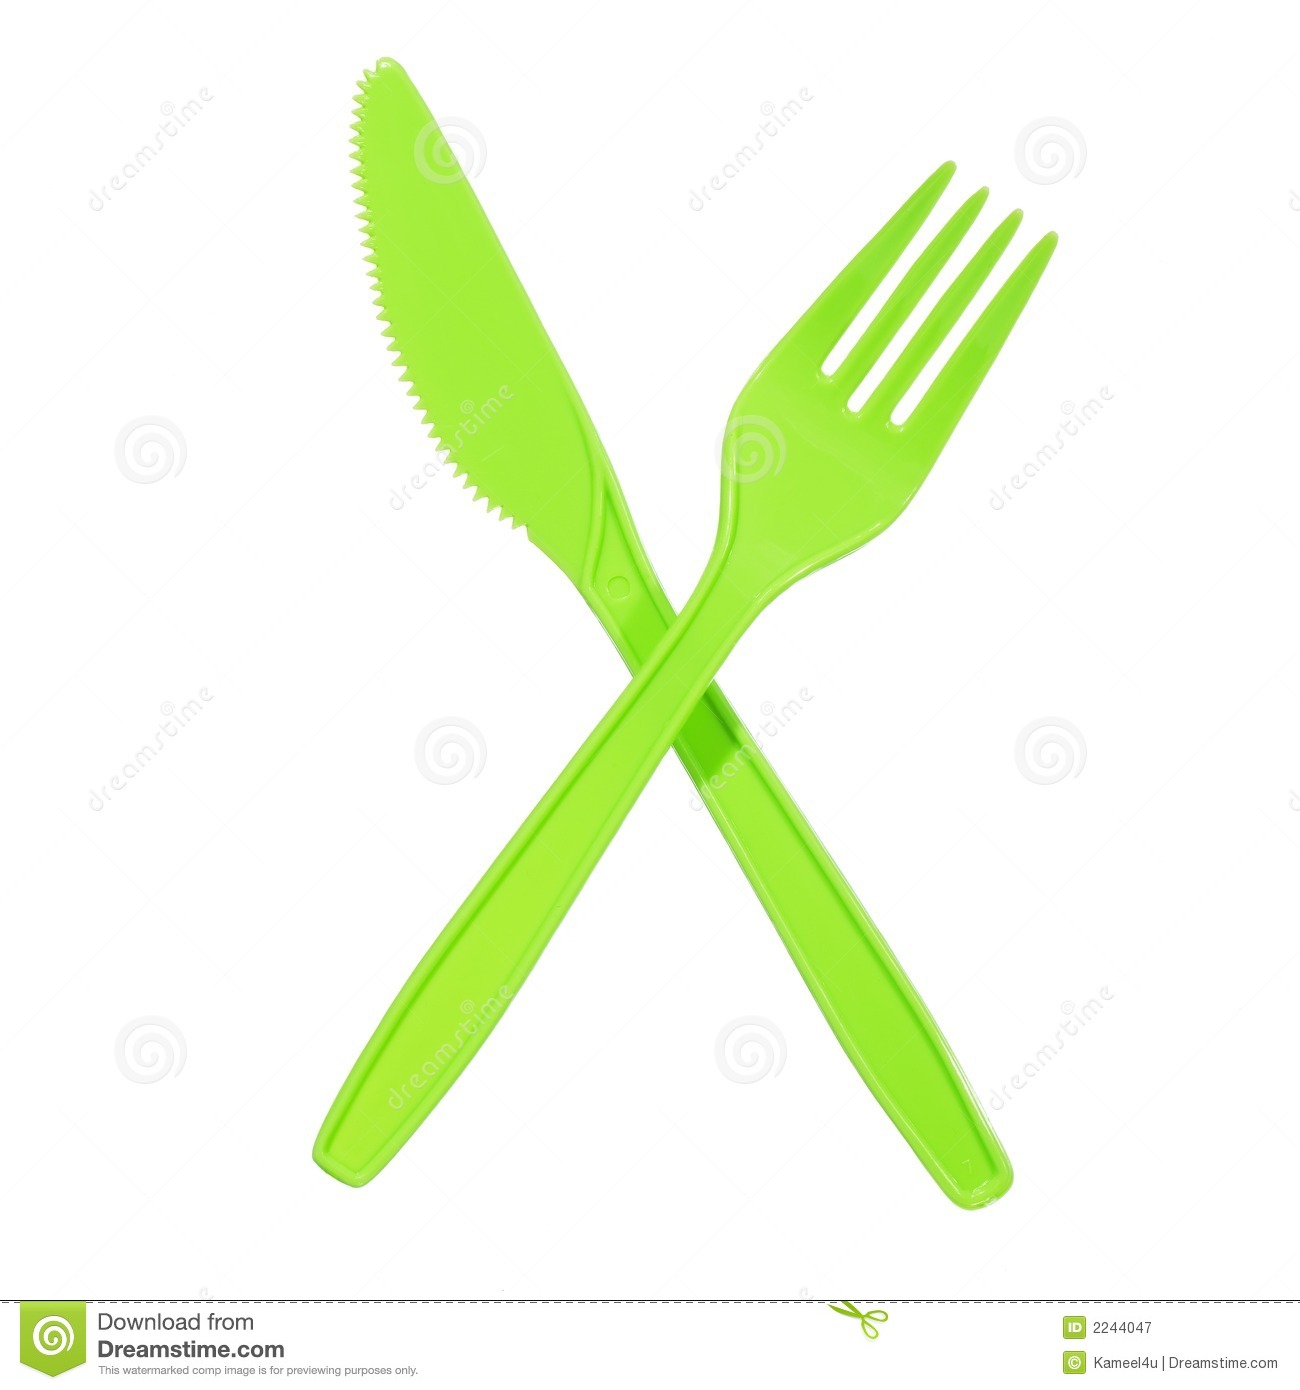 Vibrant green fork and knife